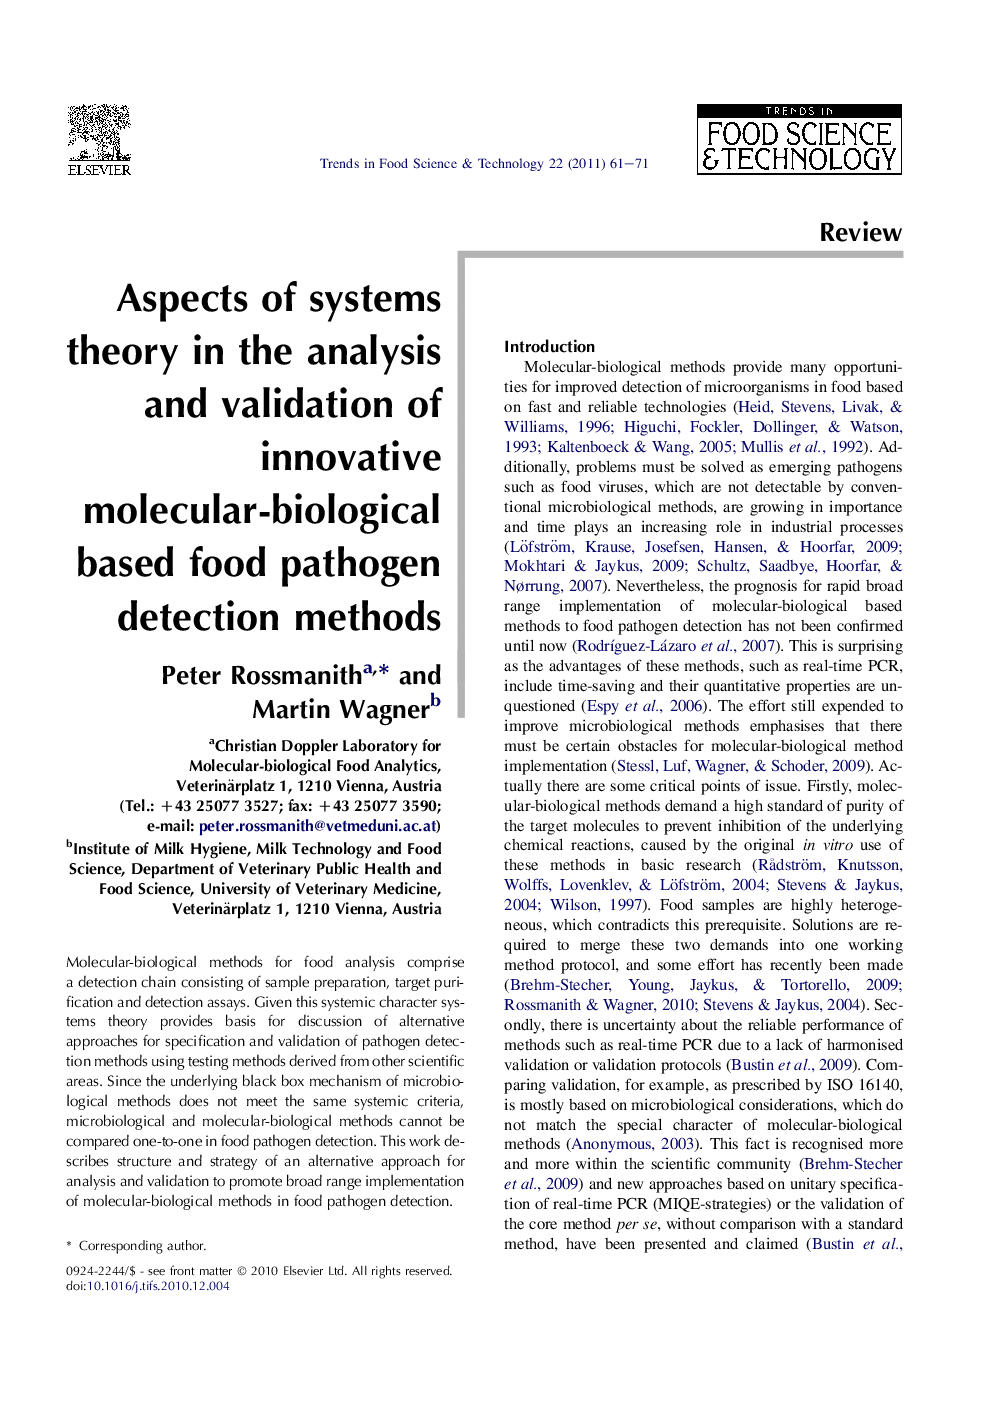 Aspects of systems theory in the analysis and validation of innovative molecular-biological based food pathogen detection methods